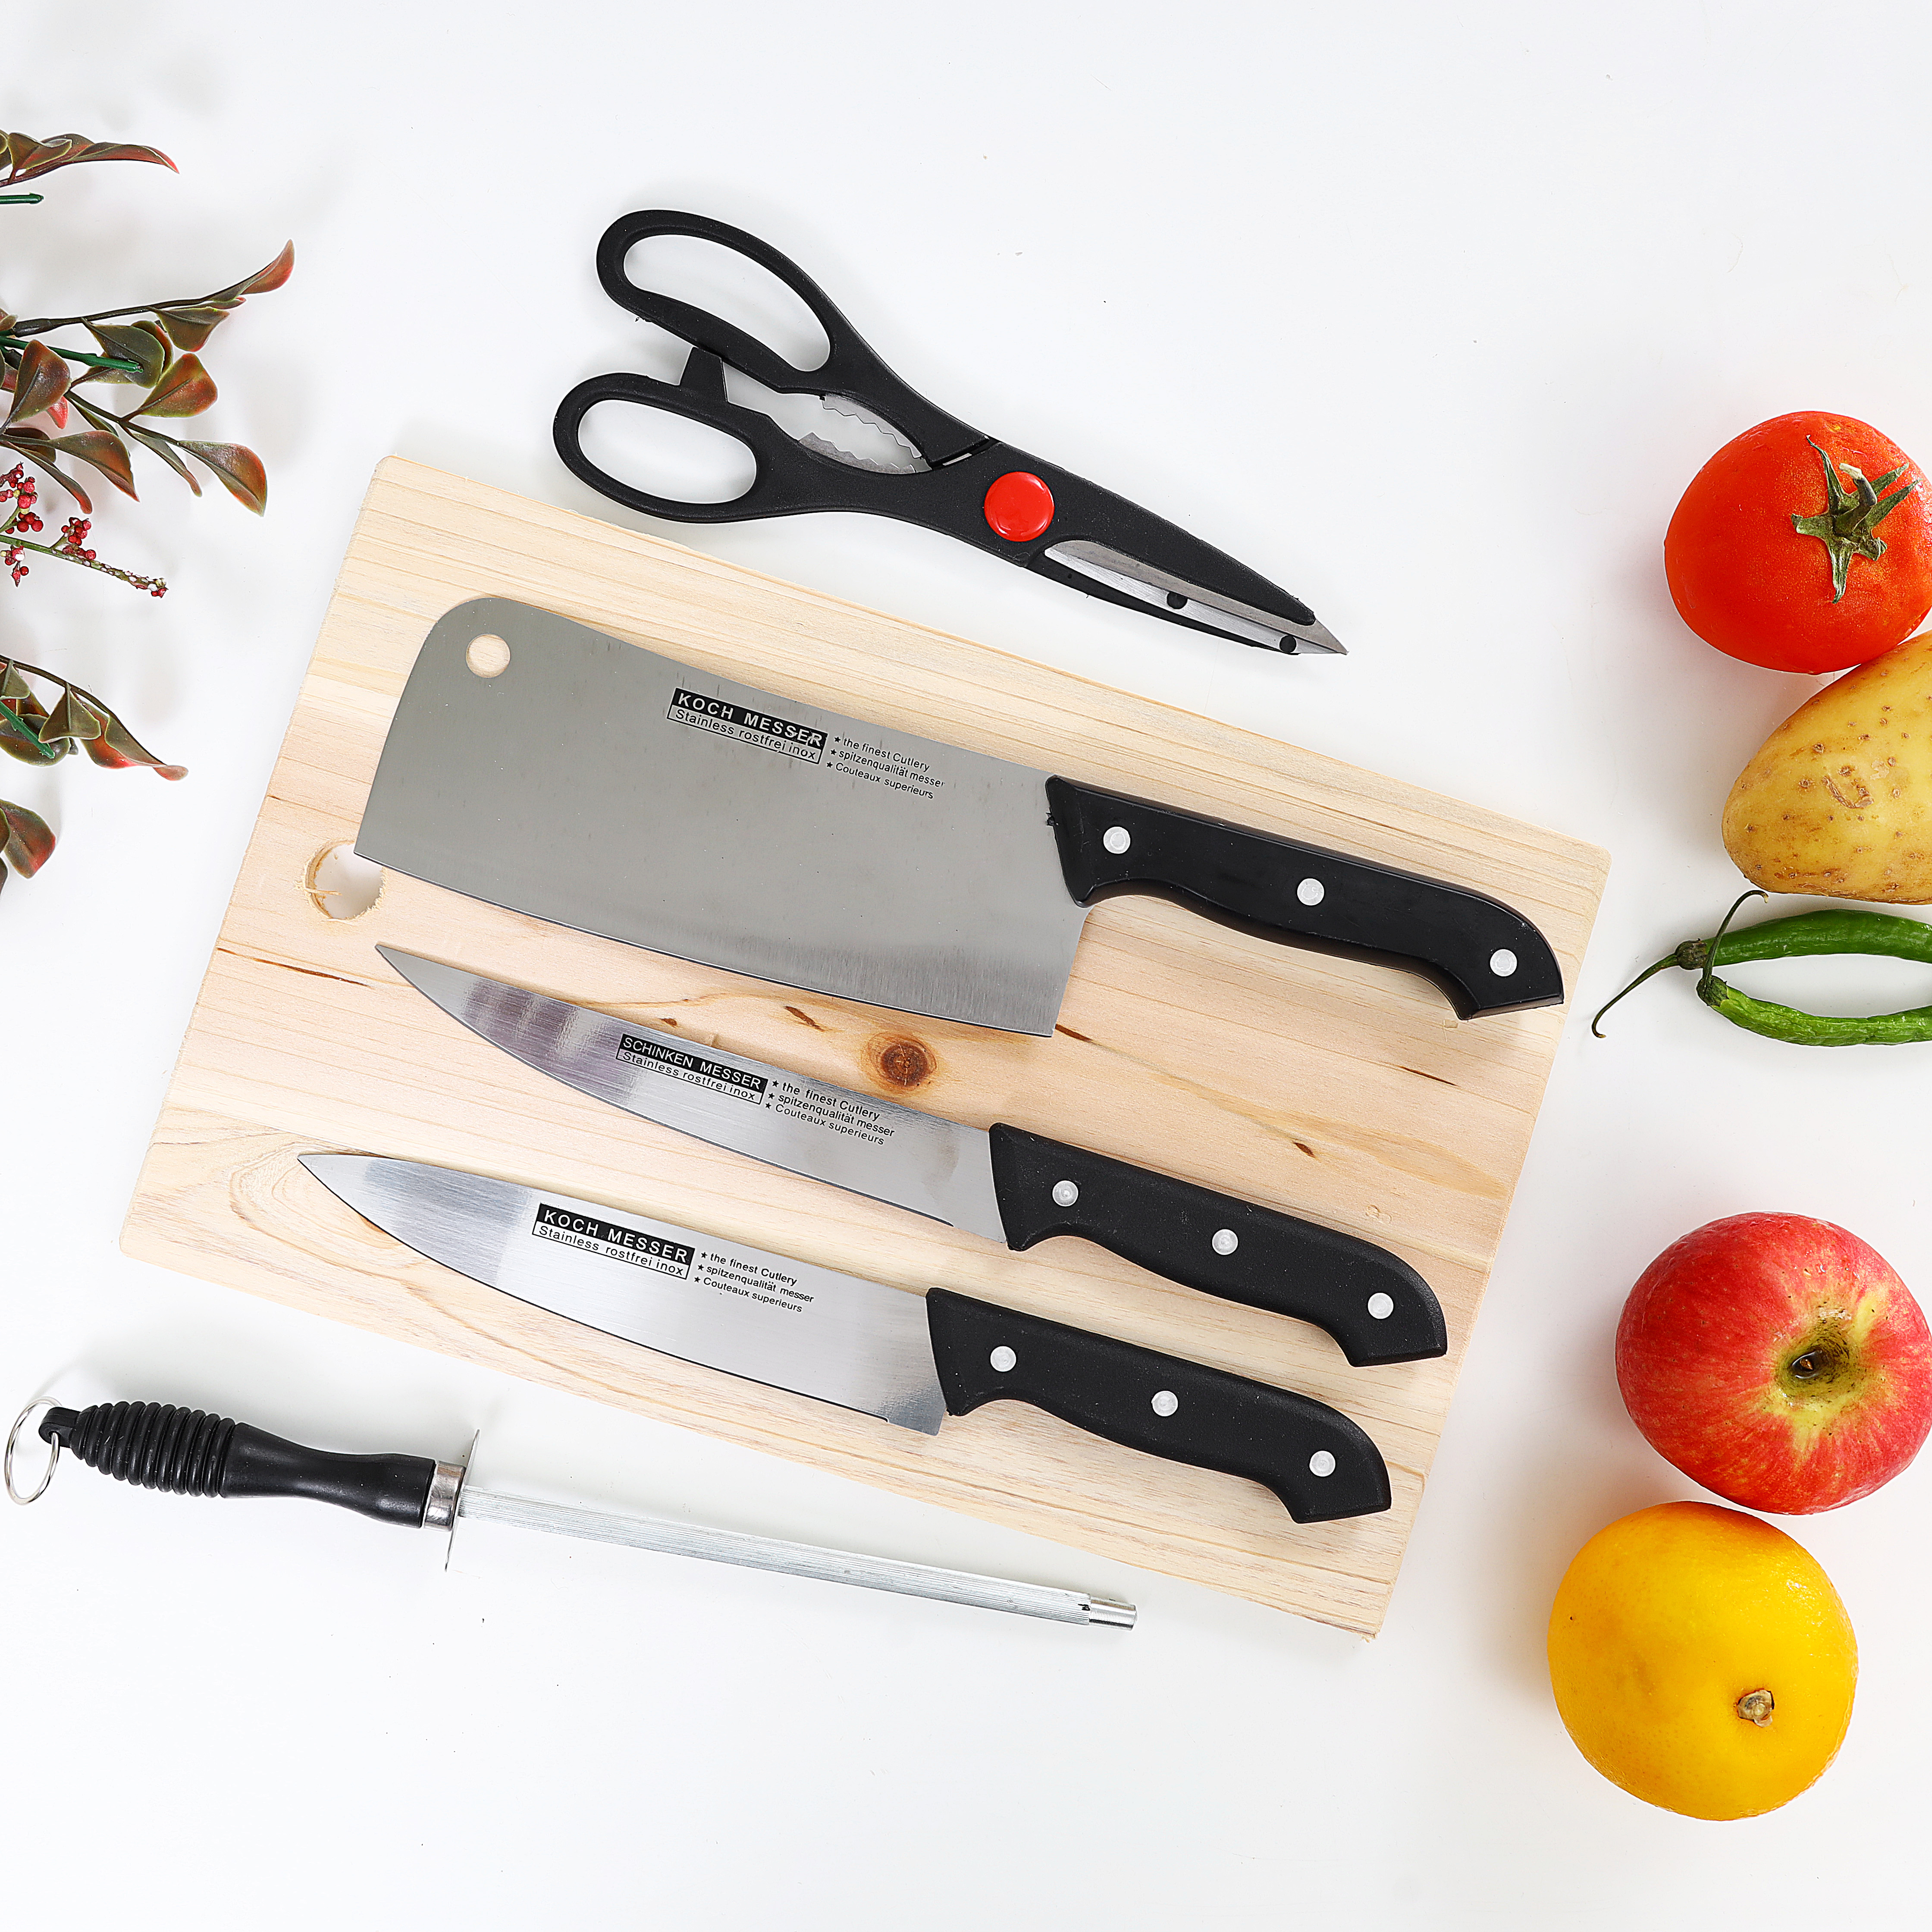 Set Of Kitchen Nesting Knives: Buy Online at Best Price in UAE 